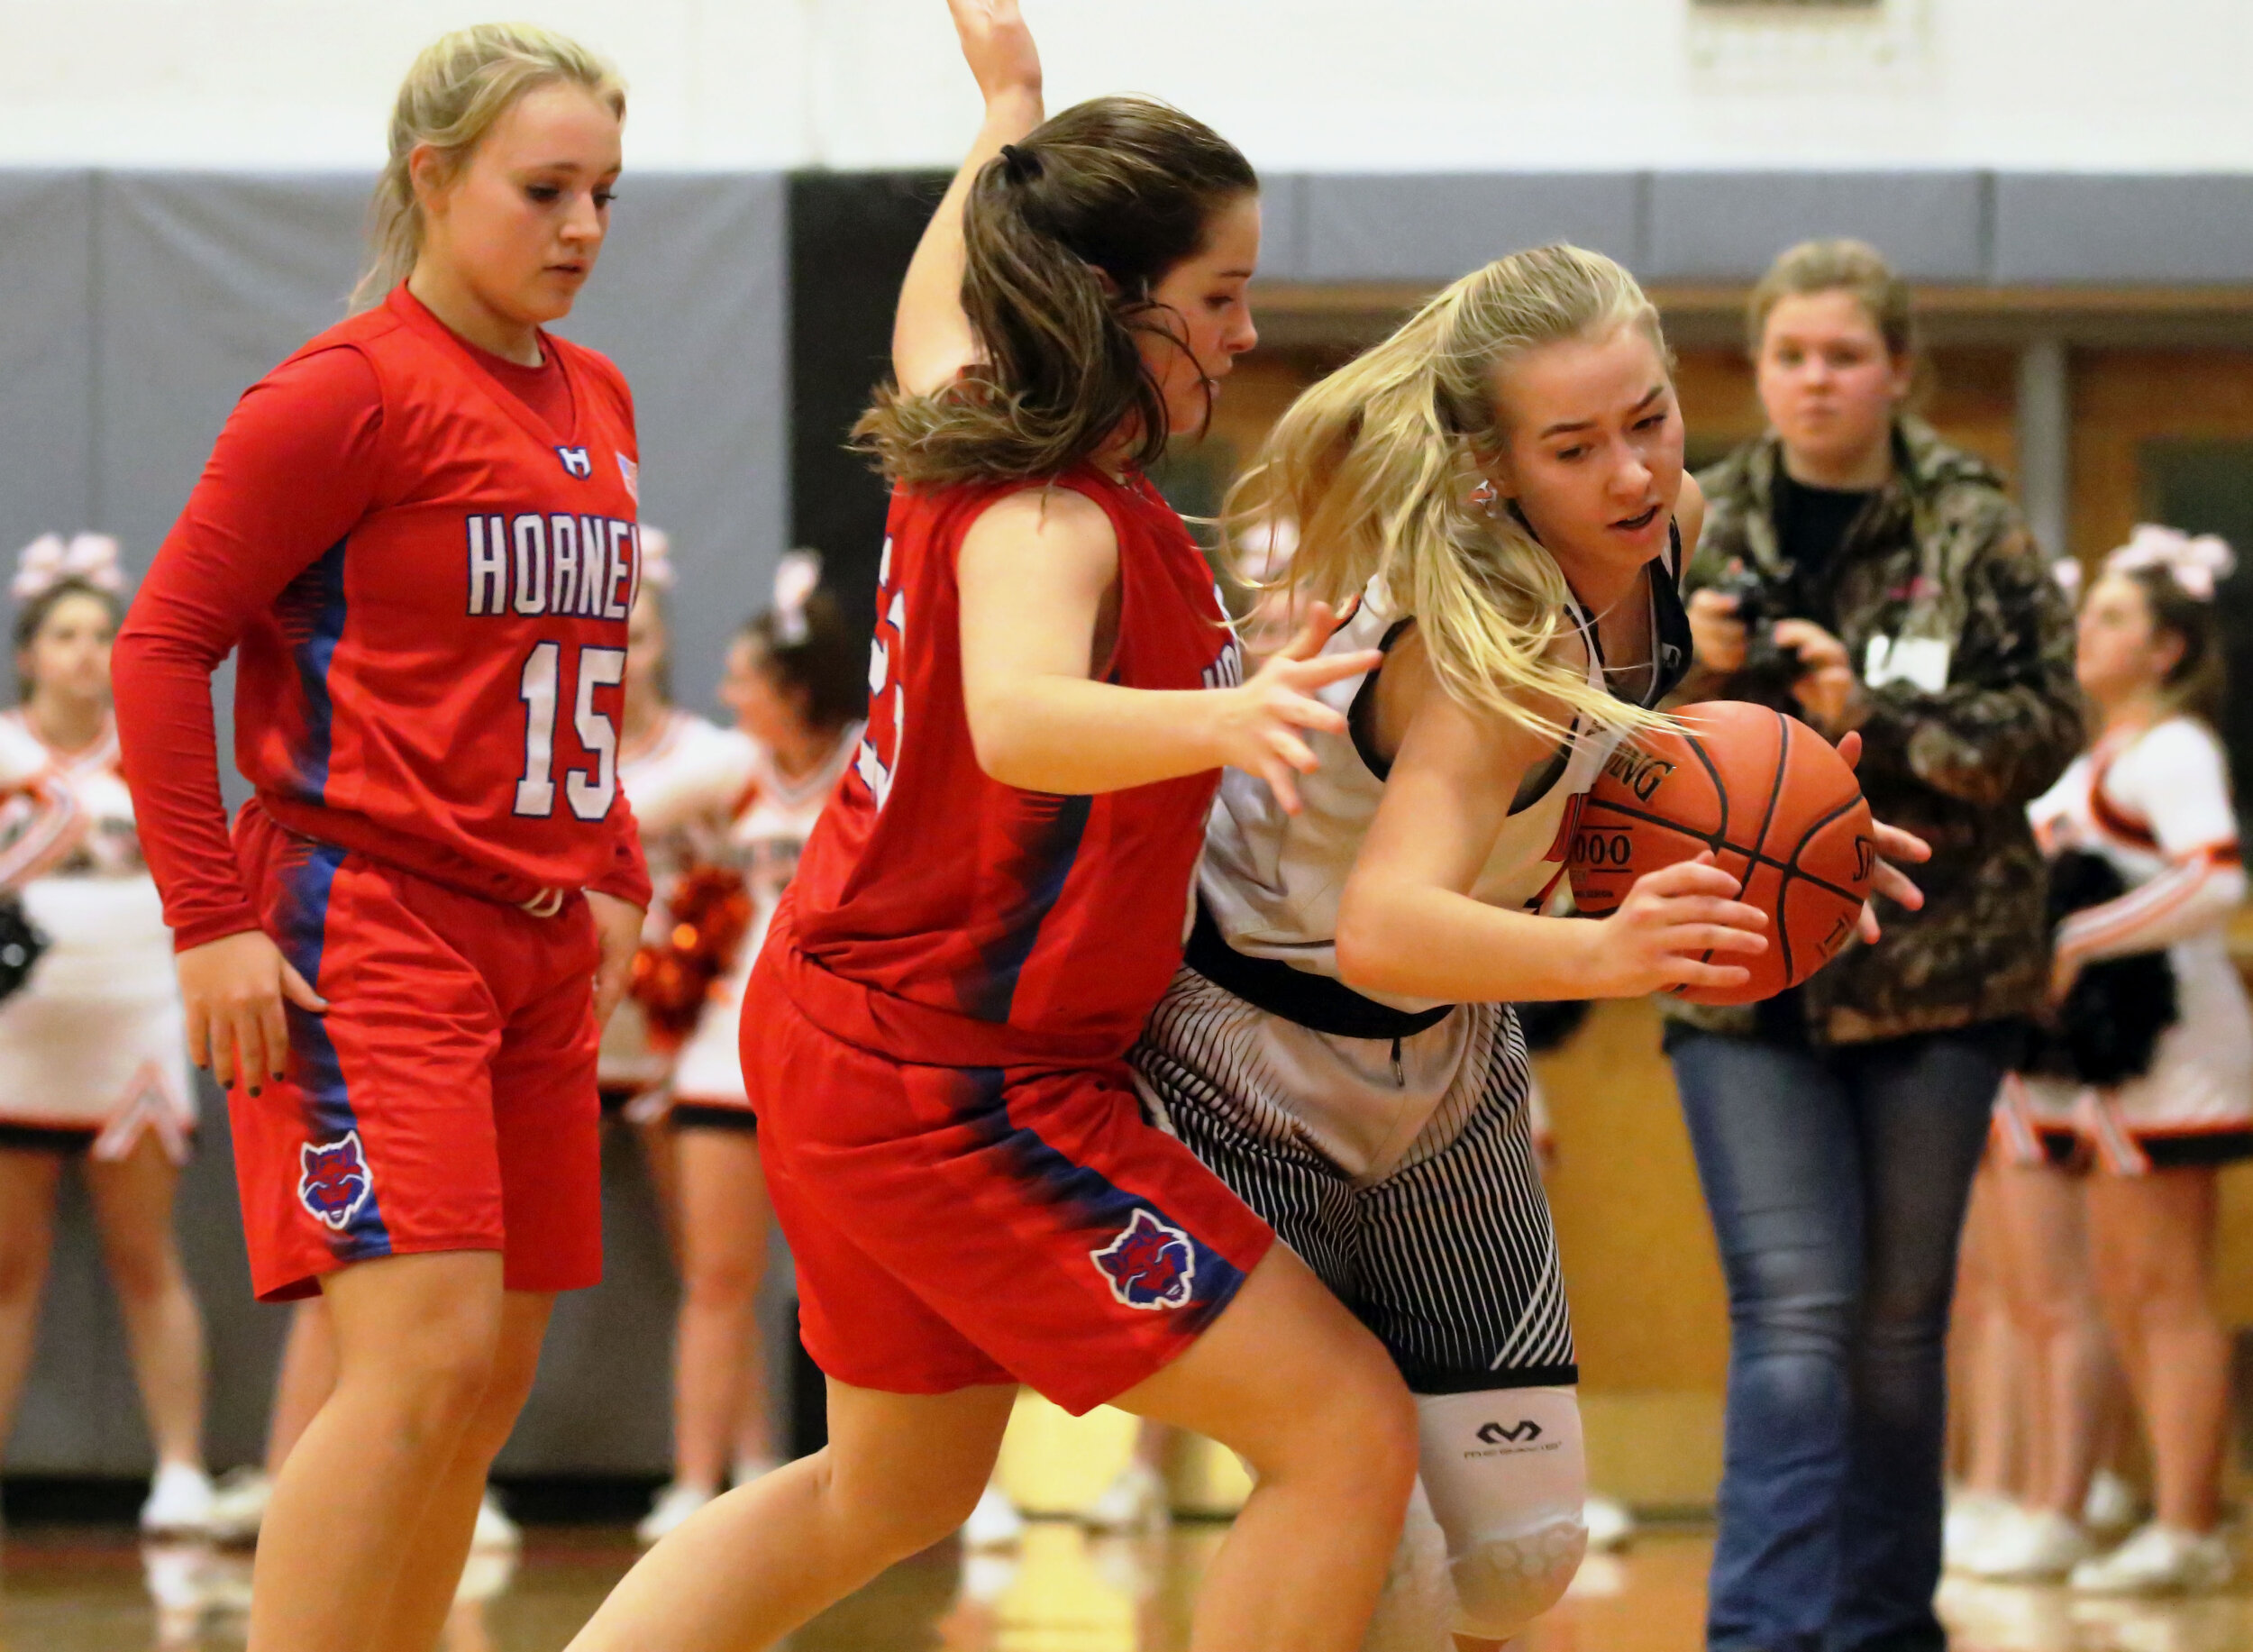  Wellsville sophomore Jaylynn Mess, right, fights her way through the Hornell defense near the sidelines during Friday’s home contest. [Chris Brooks/WellsvilleSports.com] 